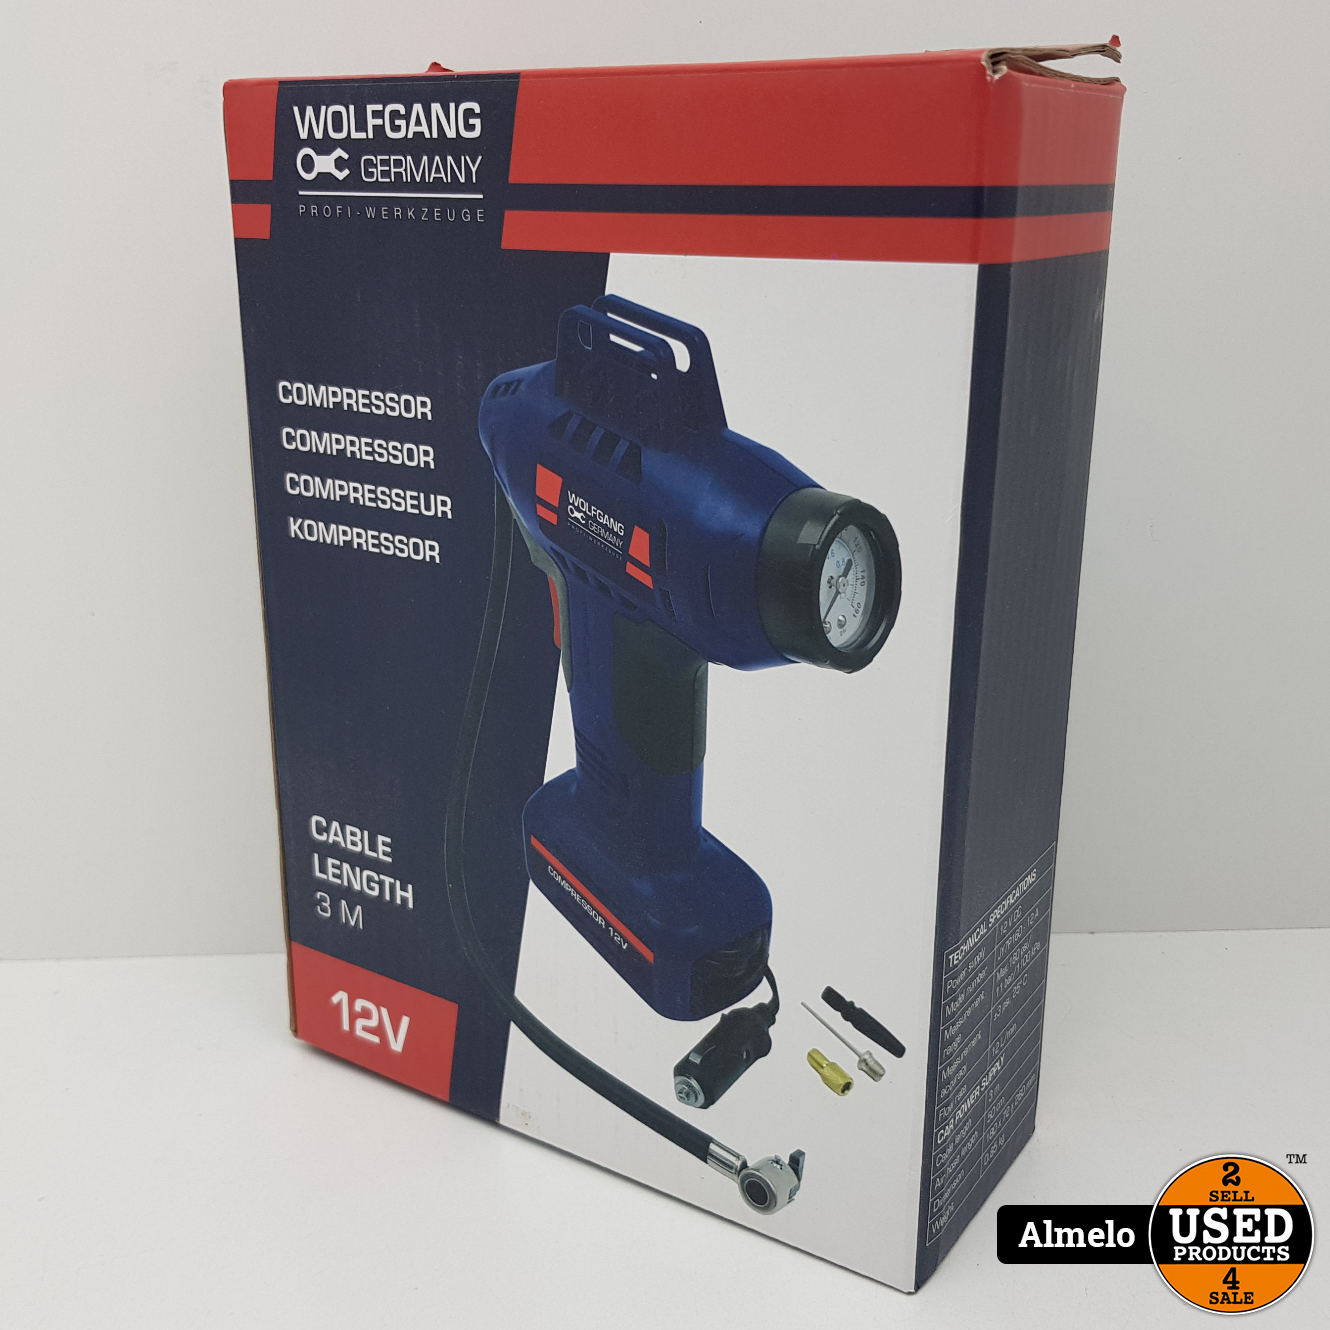 Wolfgang Compressor 12V Auto *Nieuw* - Used Products Almelo